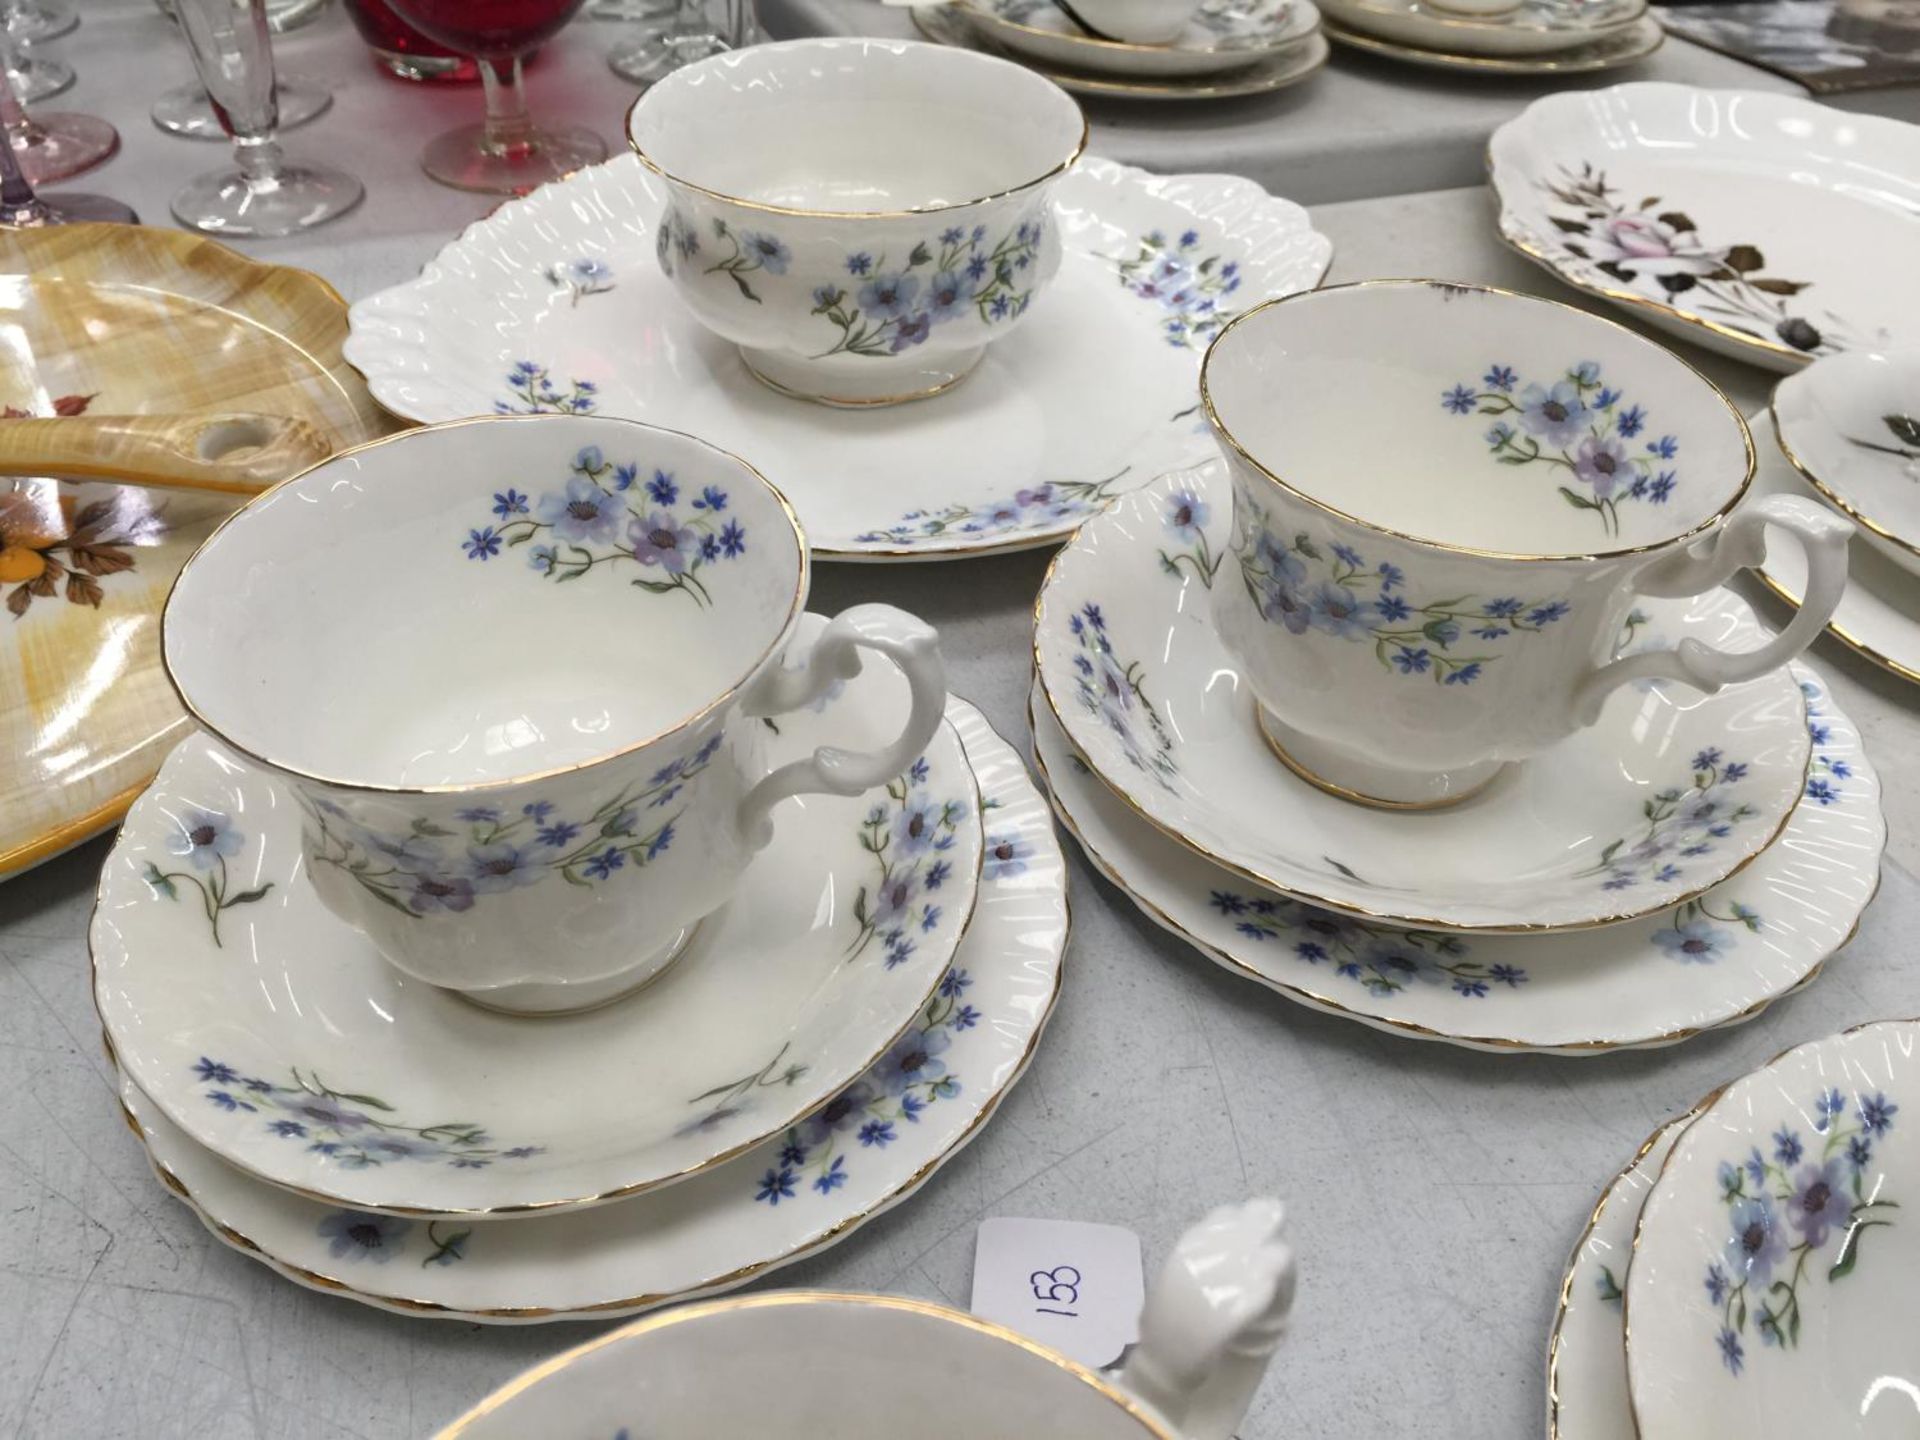 A RICHMOND 'BLUE ROCK' CHINA TEASET TO INCLUDE CUPS, SAUCERS, SIDE PLATES, SANDWICH PLATE CREAM - Image 4 of 6